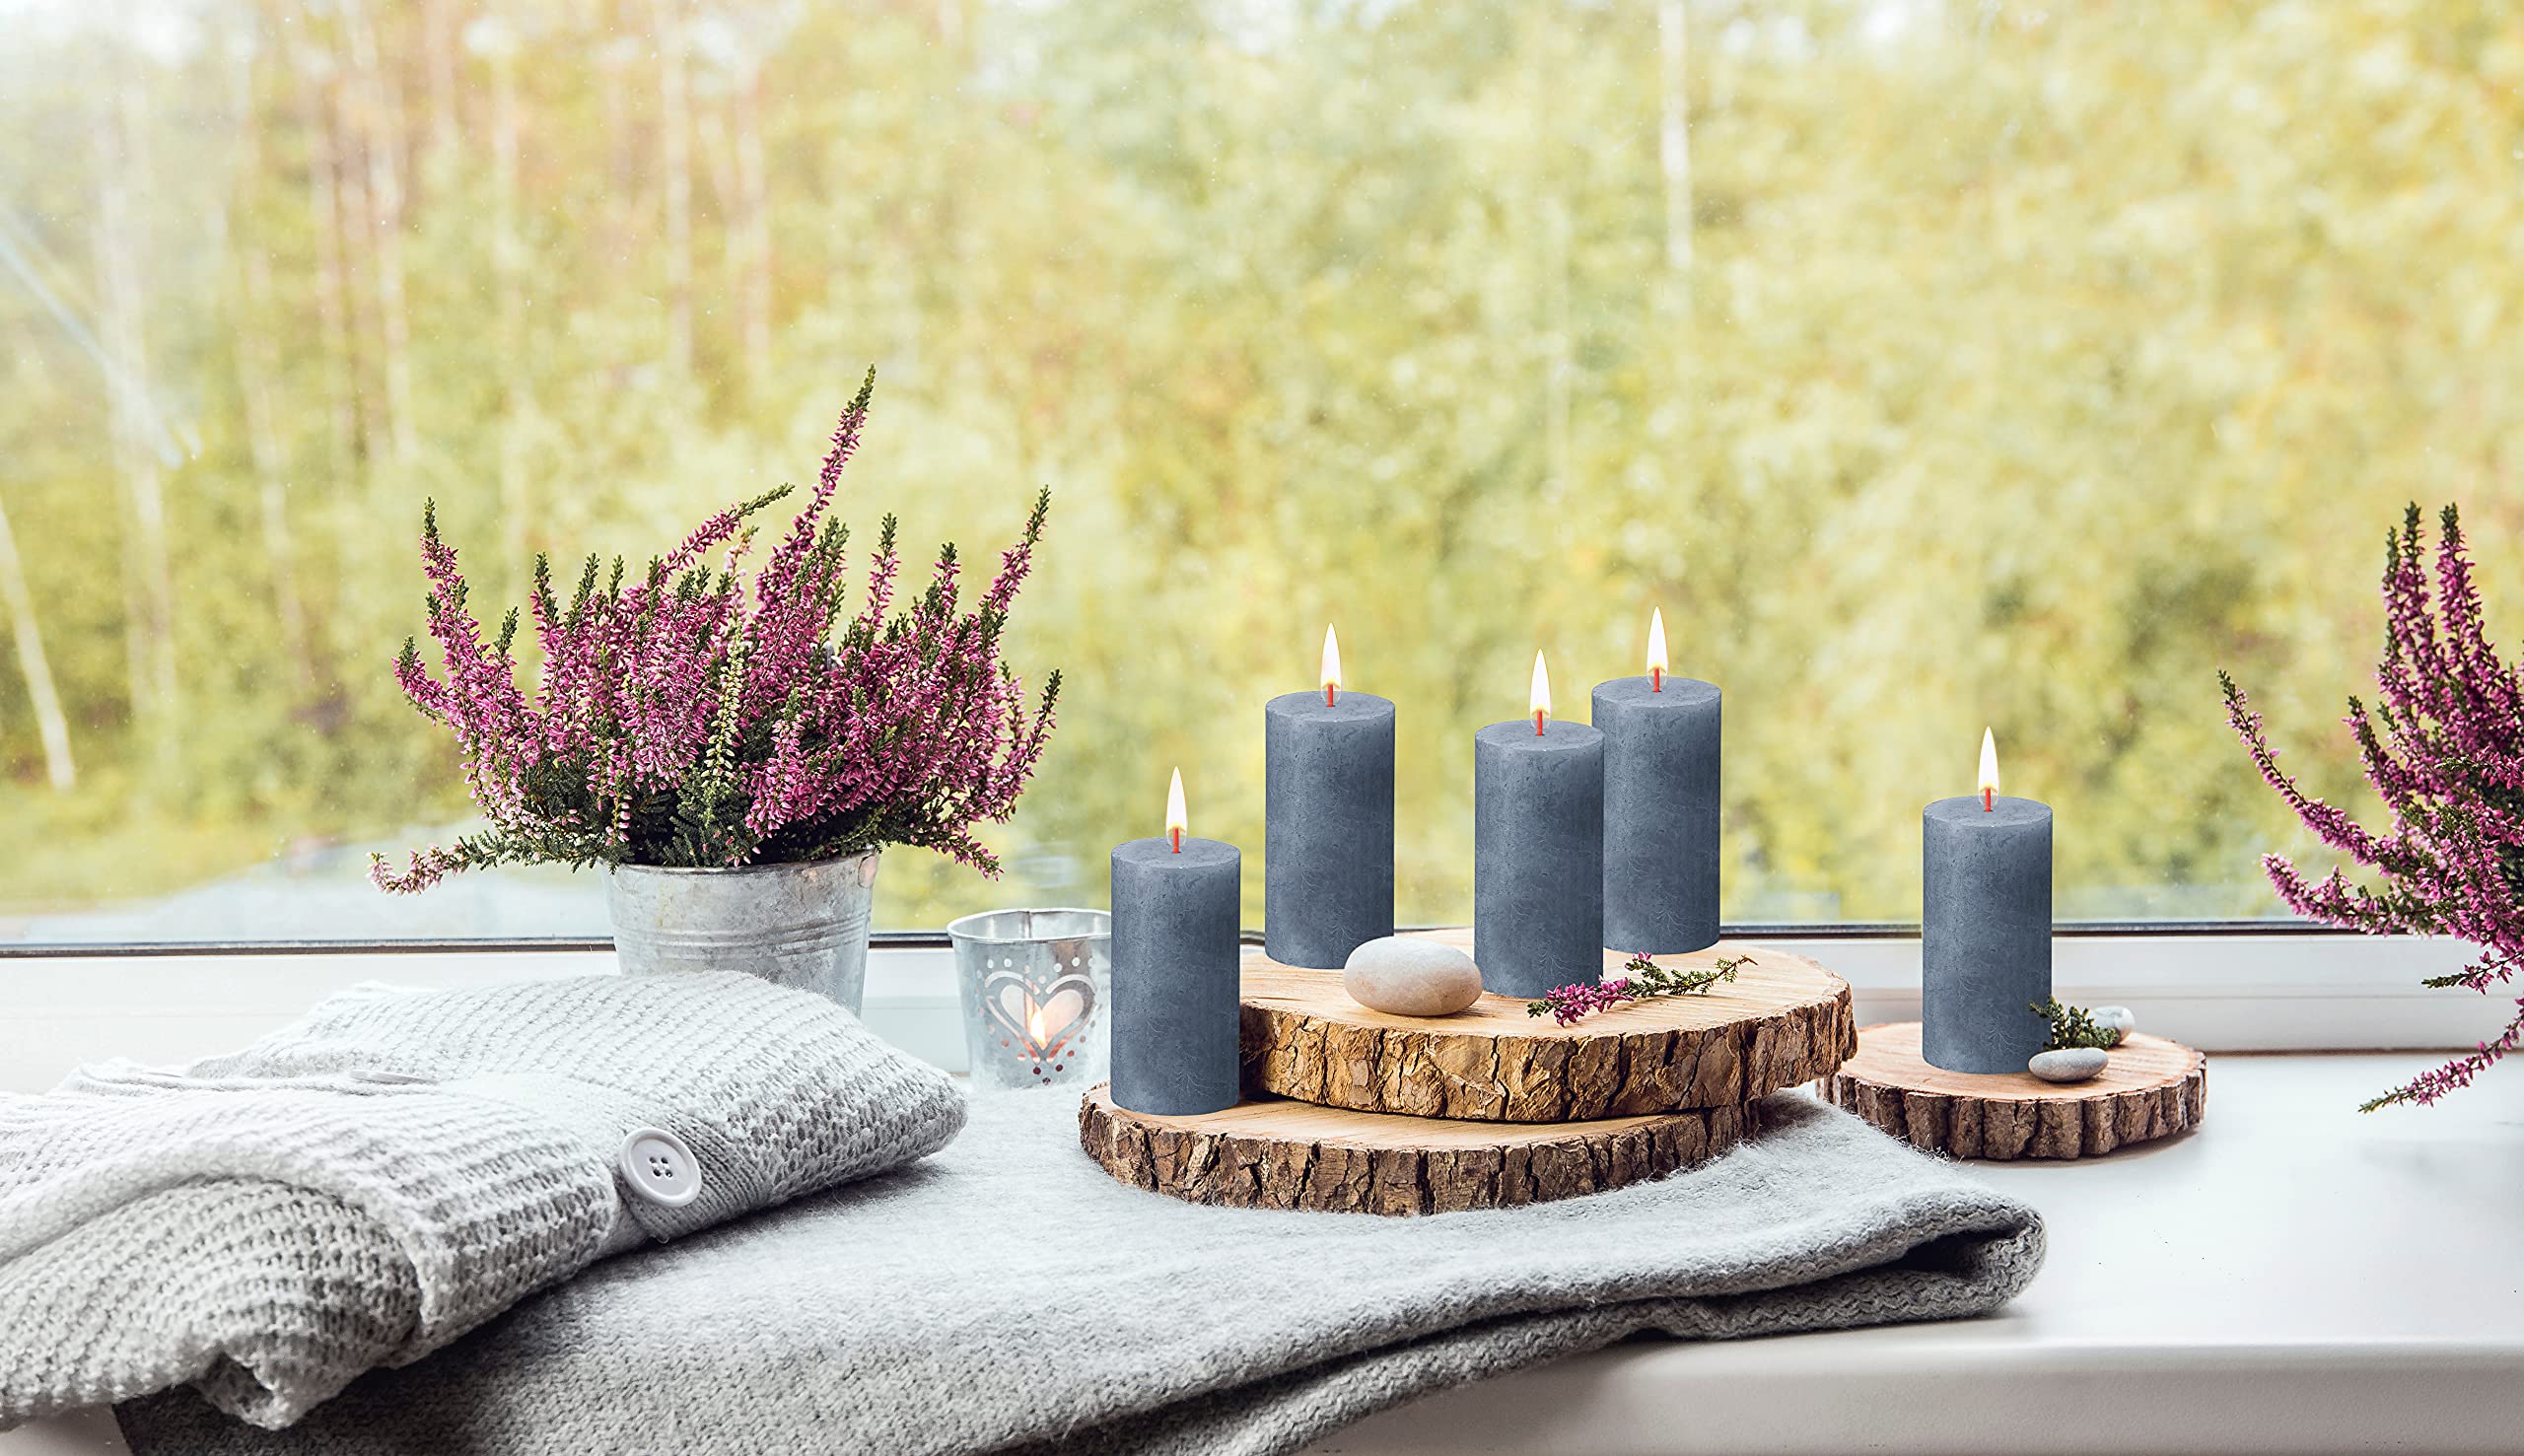 BOLSIUS 4 Pack Twilight Blue Rustic Pillar Candles - 2 X 4 Inches - Premium European Quality - Includes Natural Plant-Based Wax - Unscented Dripless Smokeless 30 Hour Party and Wedding Candles  - Very Good